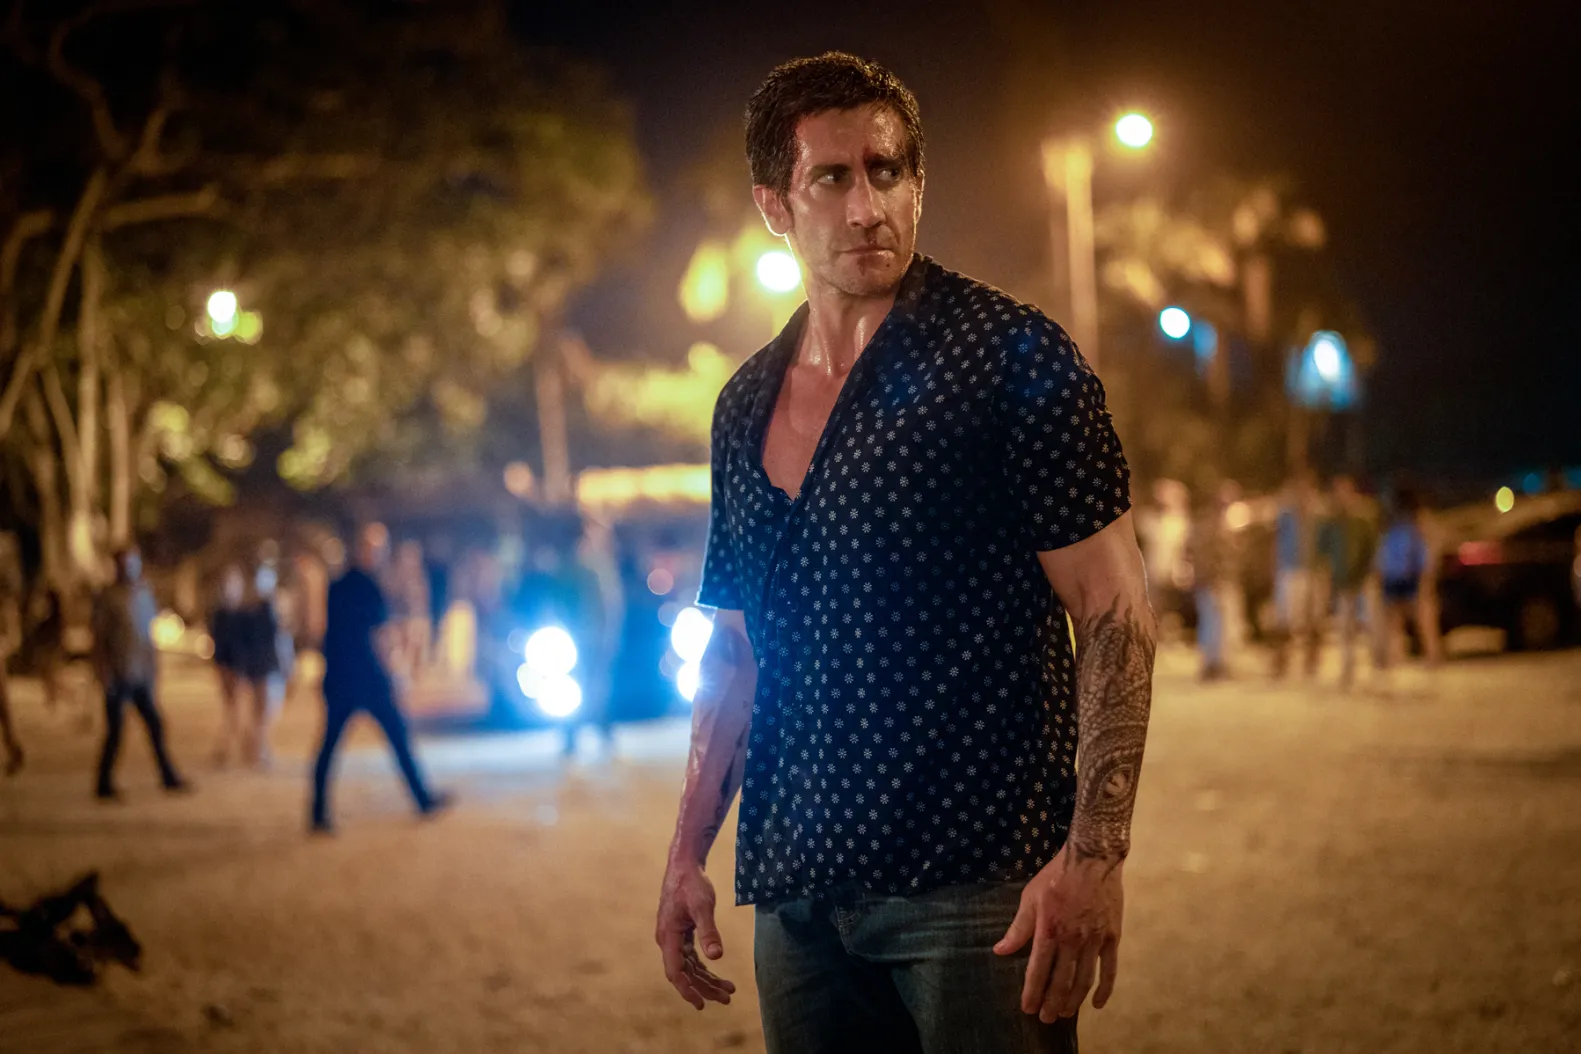 "Road House" gets official trailer - Prime Video - starring Jake Gyllenhaal - March 21